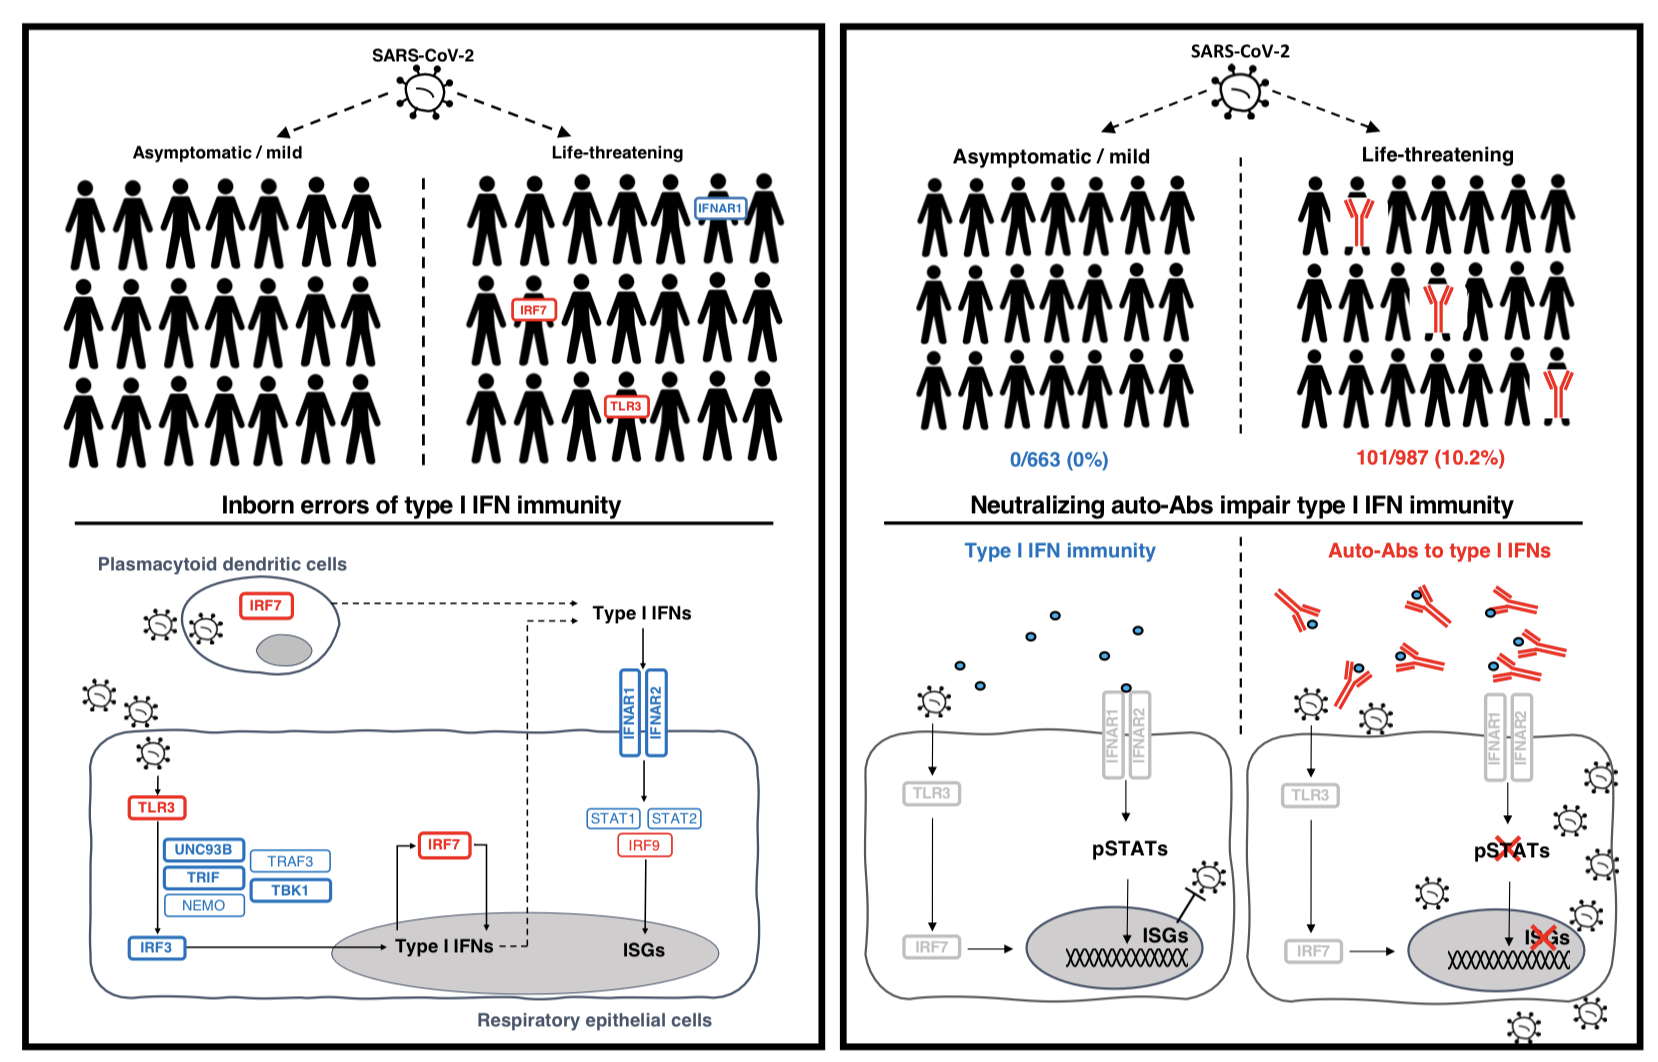 Diagram explaining the findings of the COVID Human Genetic Effort study.